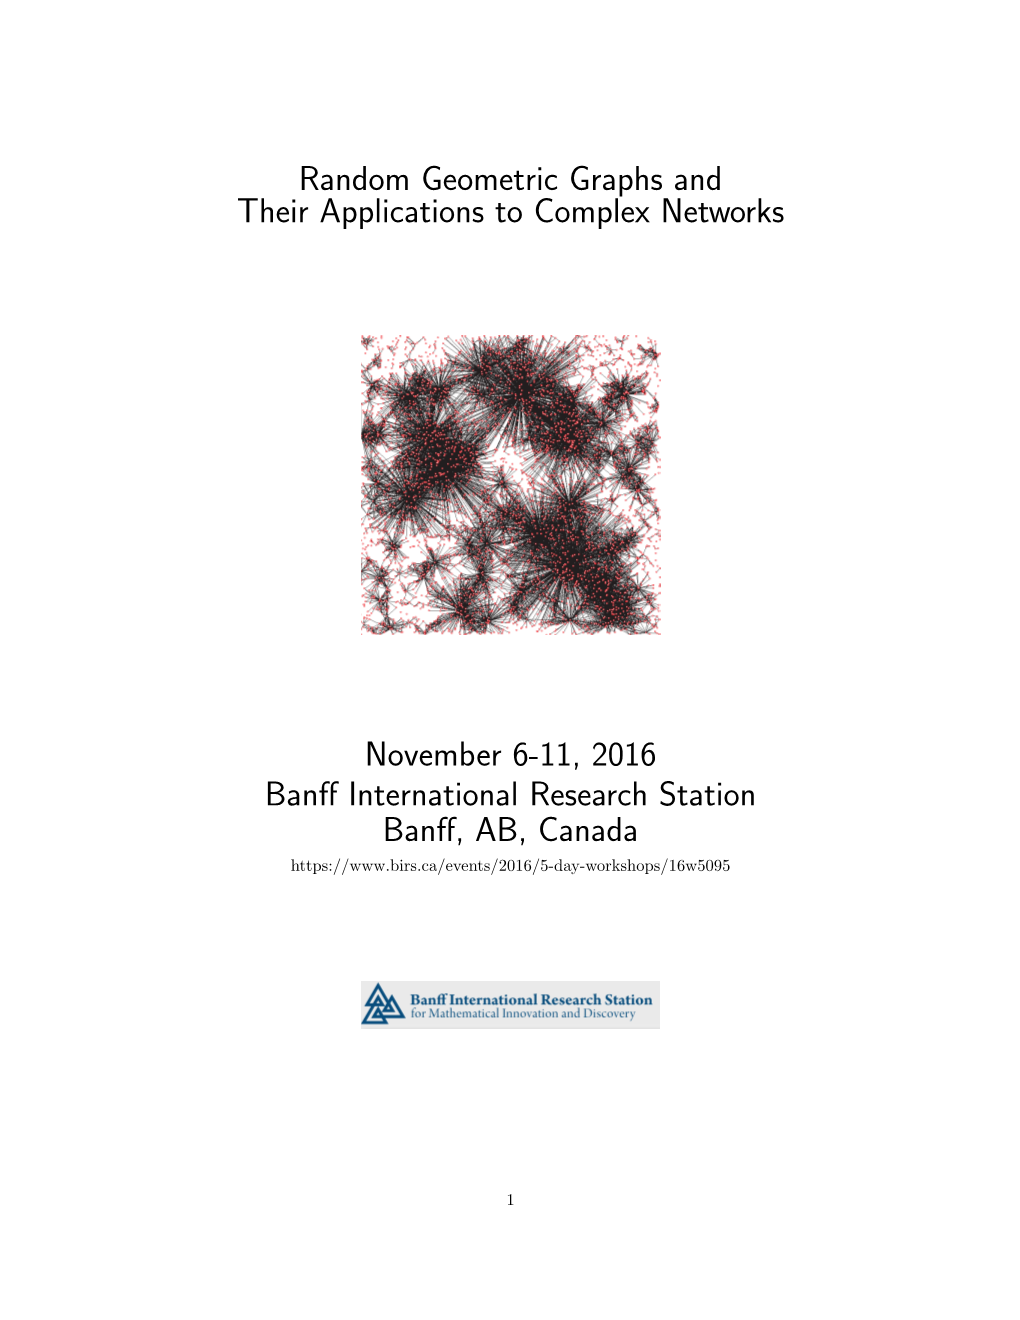 Random Geometric Graphs and Their Applications to Complex Networks November 6-11, 2016 Banff International Research Station Banf